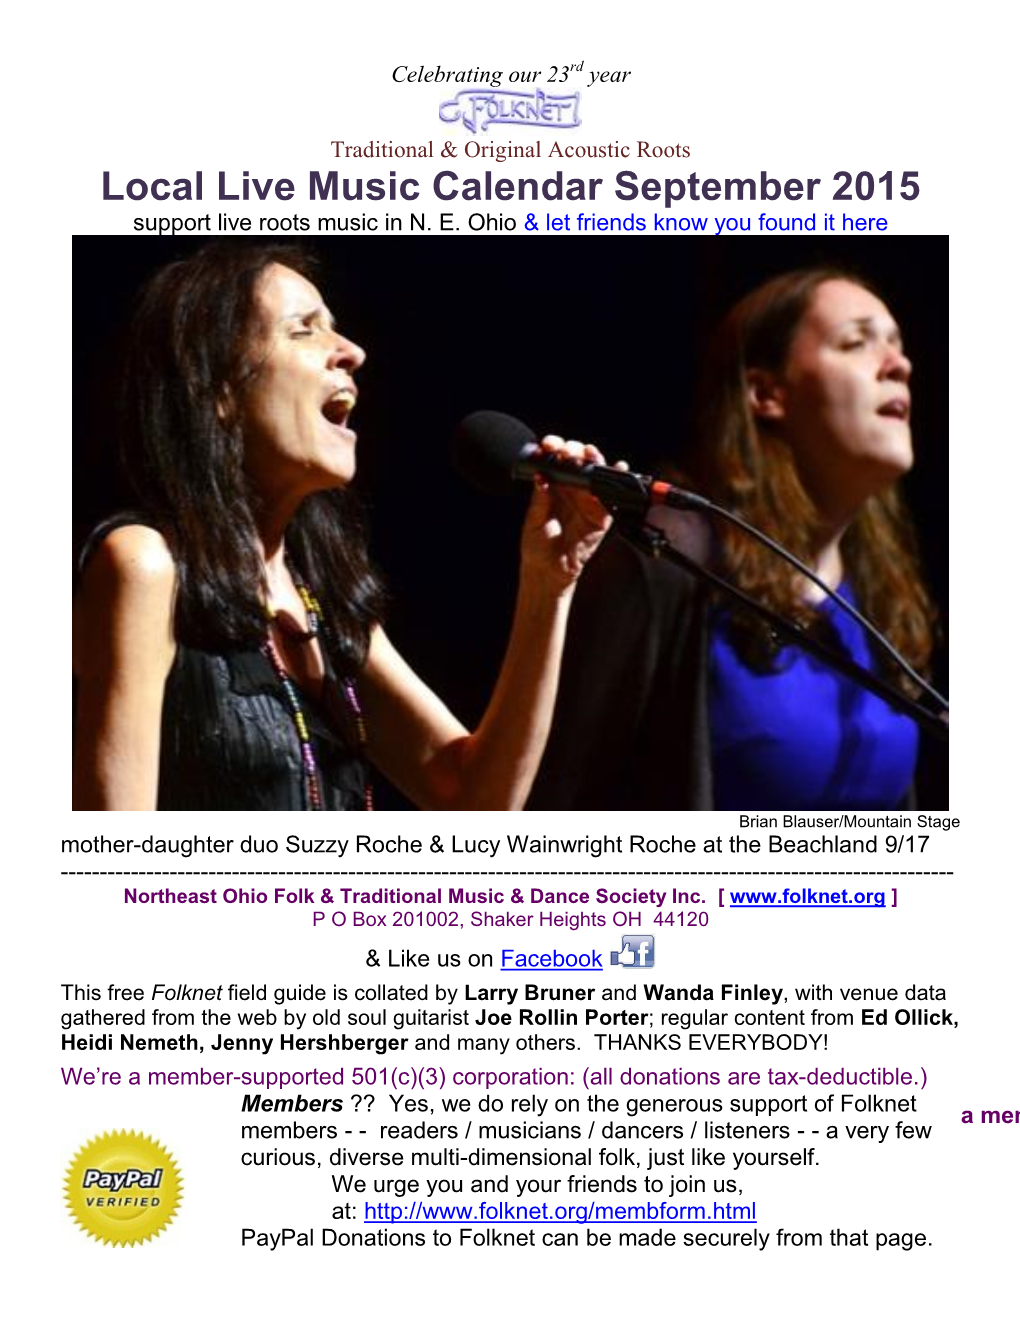 Local Live Music Calendar September 2015 Support Live Roots Music in N